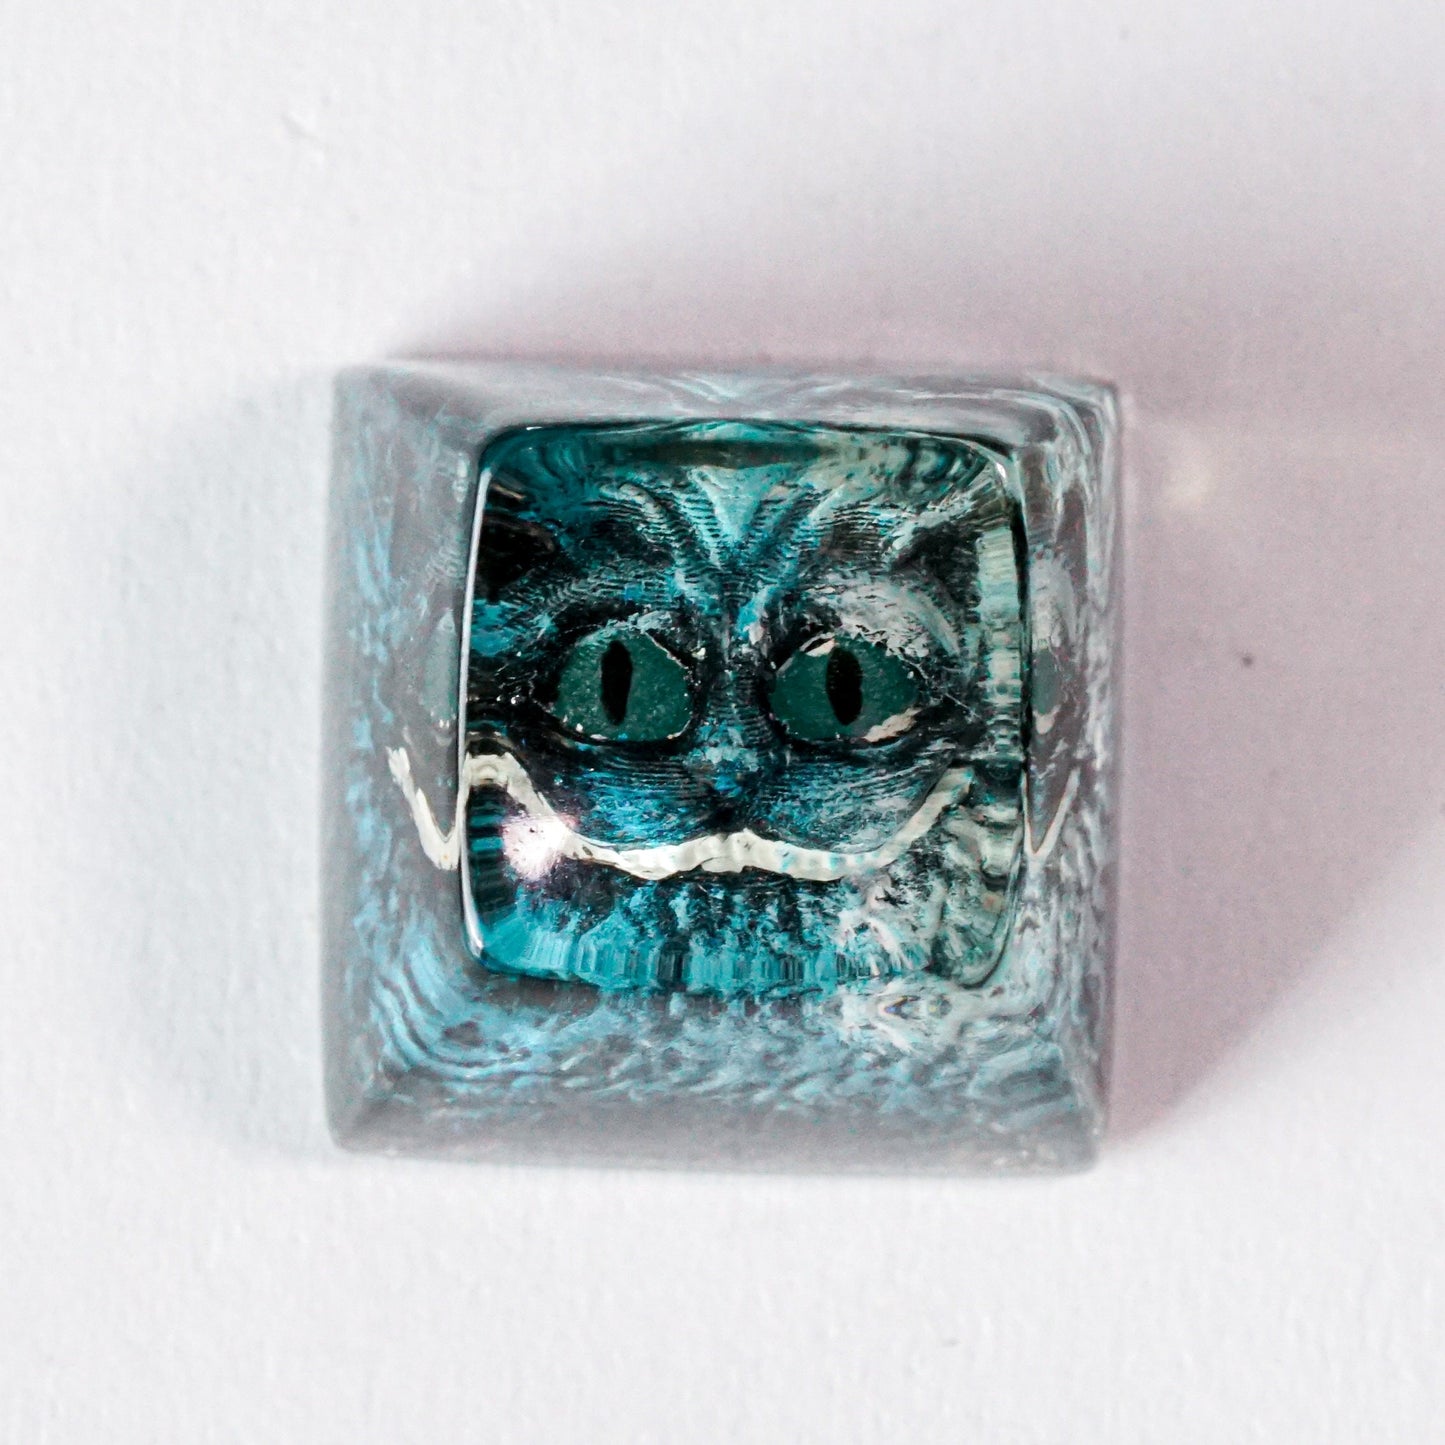 Cat Face Keycap- Cat Keycap- Keycap For Cherry MX Switches Mechanical Keyboard- Gift for Cat Lover - Datkey Studio